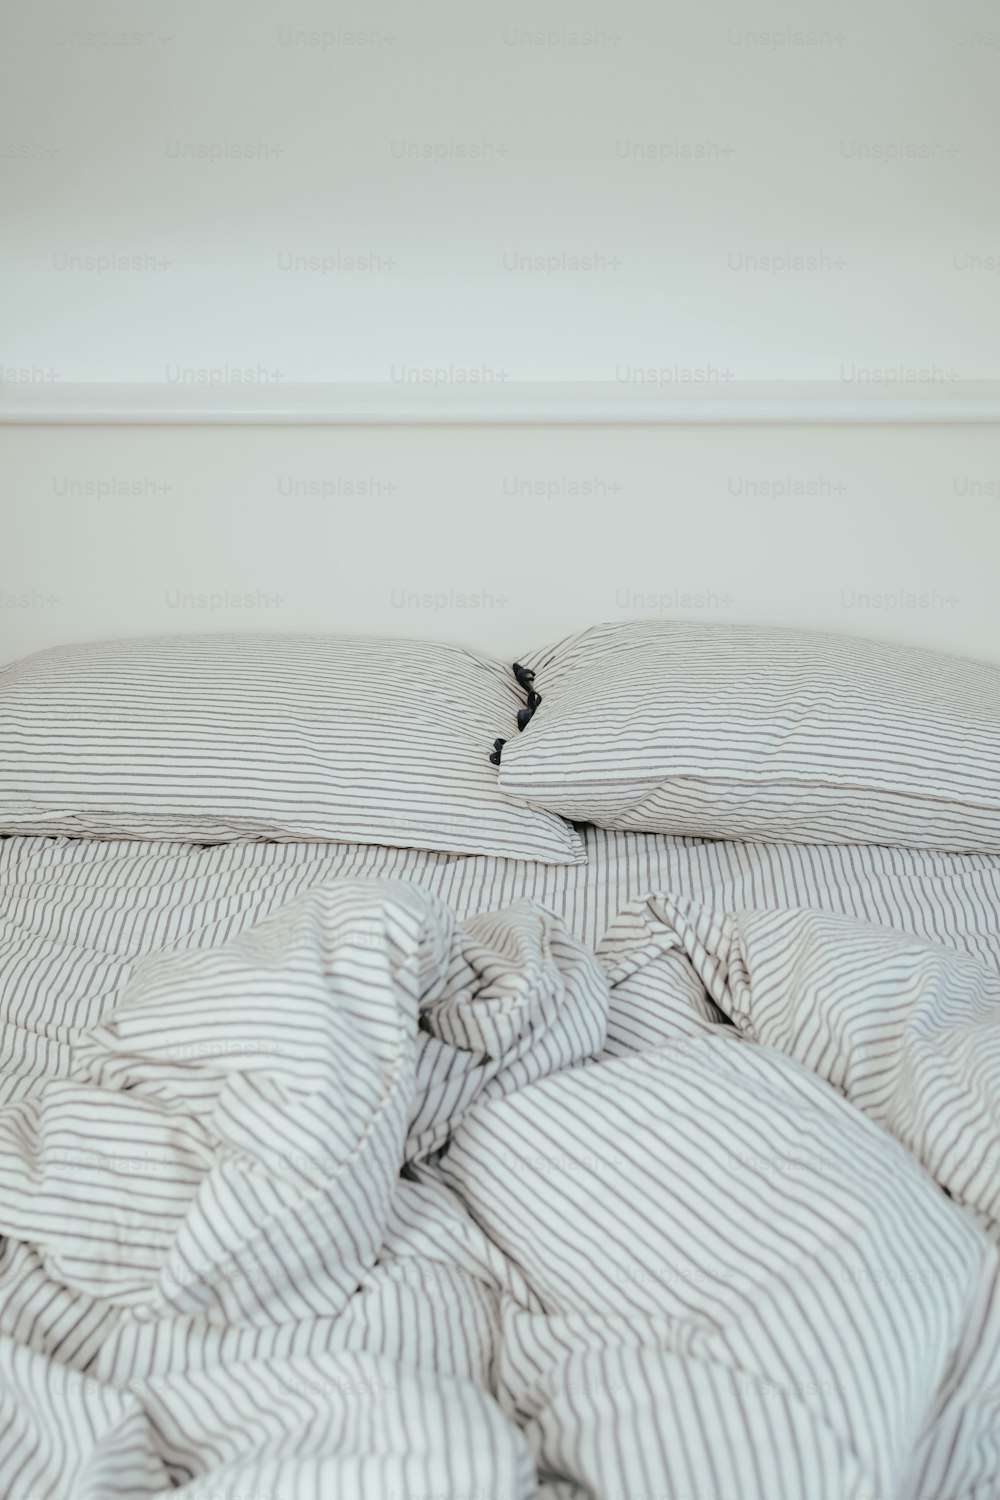 an unmade bed with a striped comforter and pillows